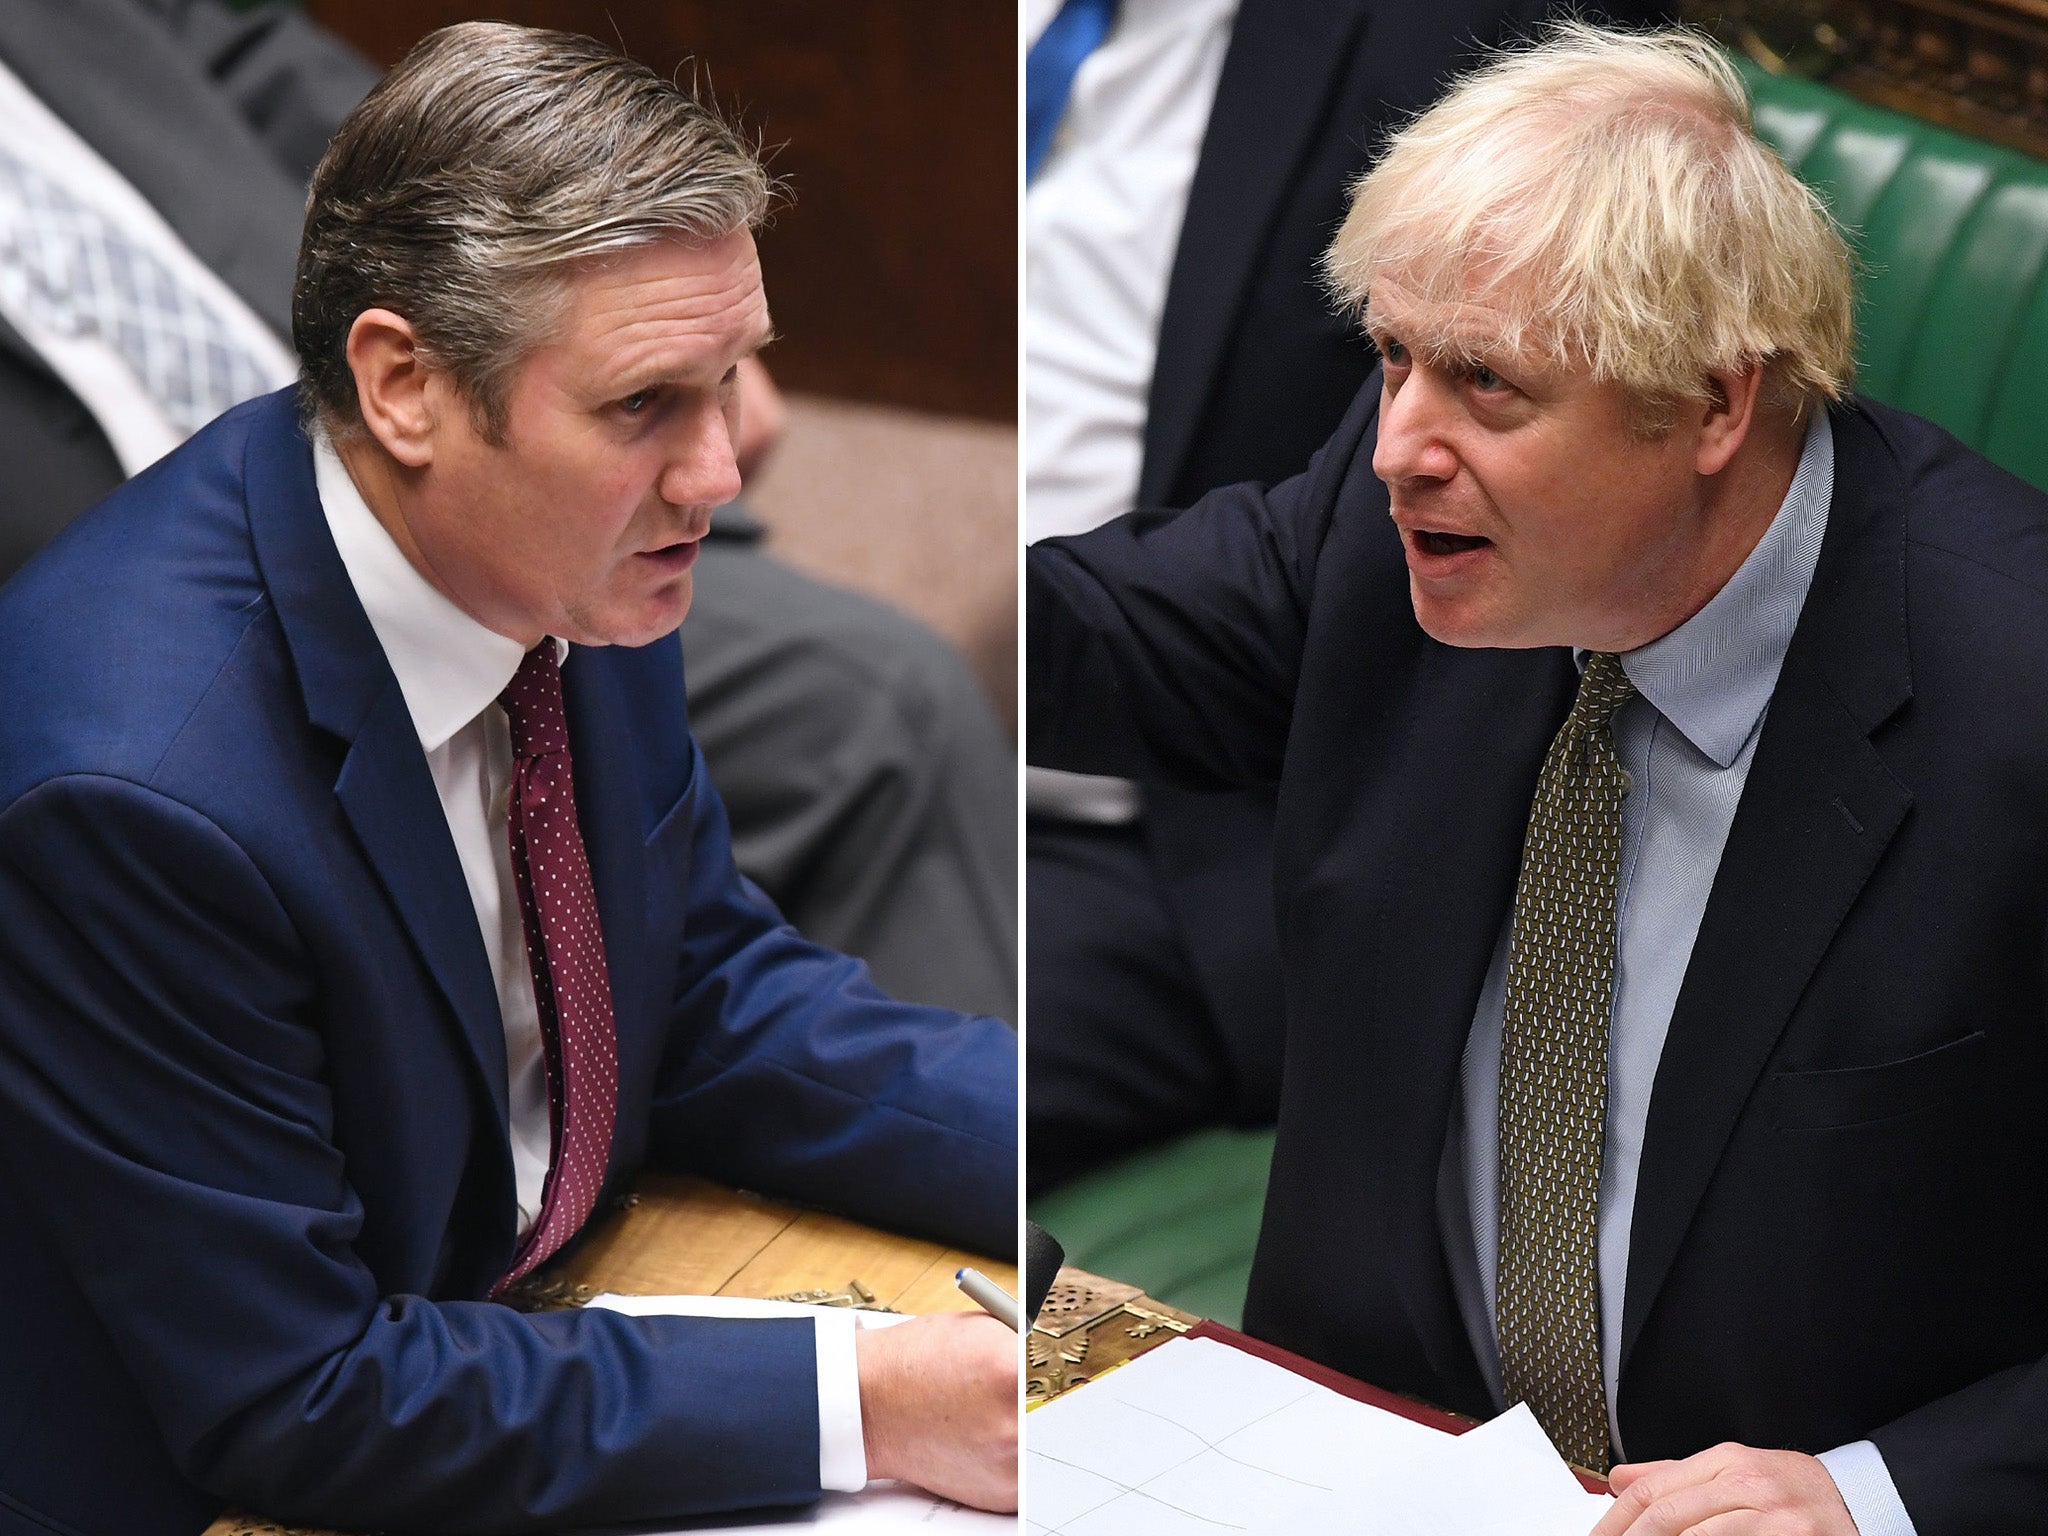 Starmer’s elegant trap puts the PM in an impossible position